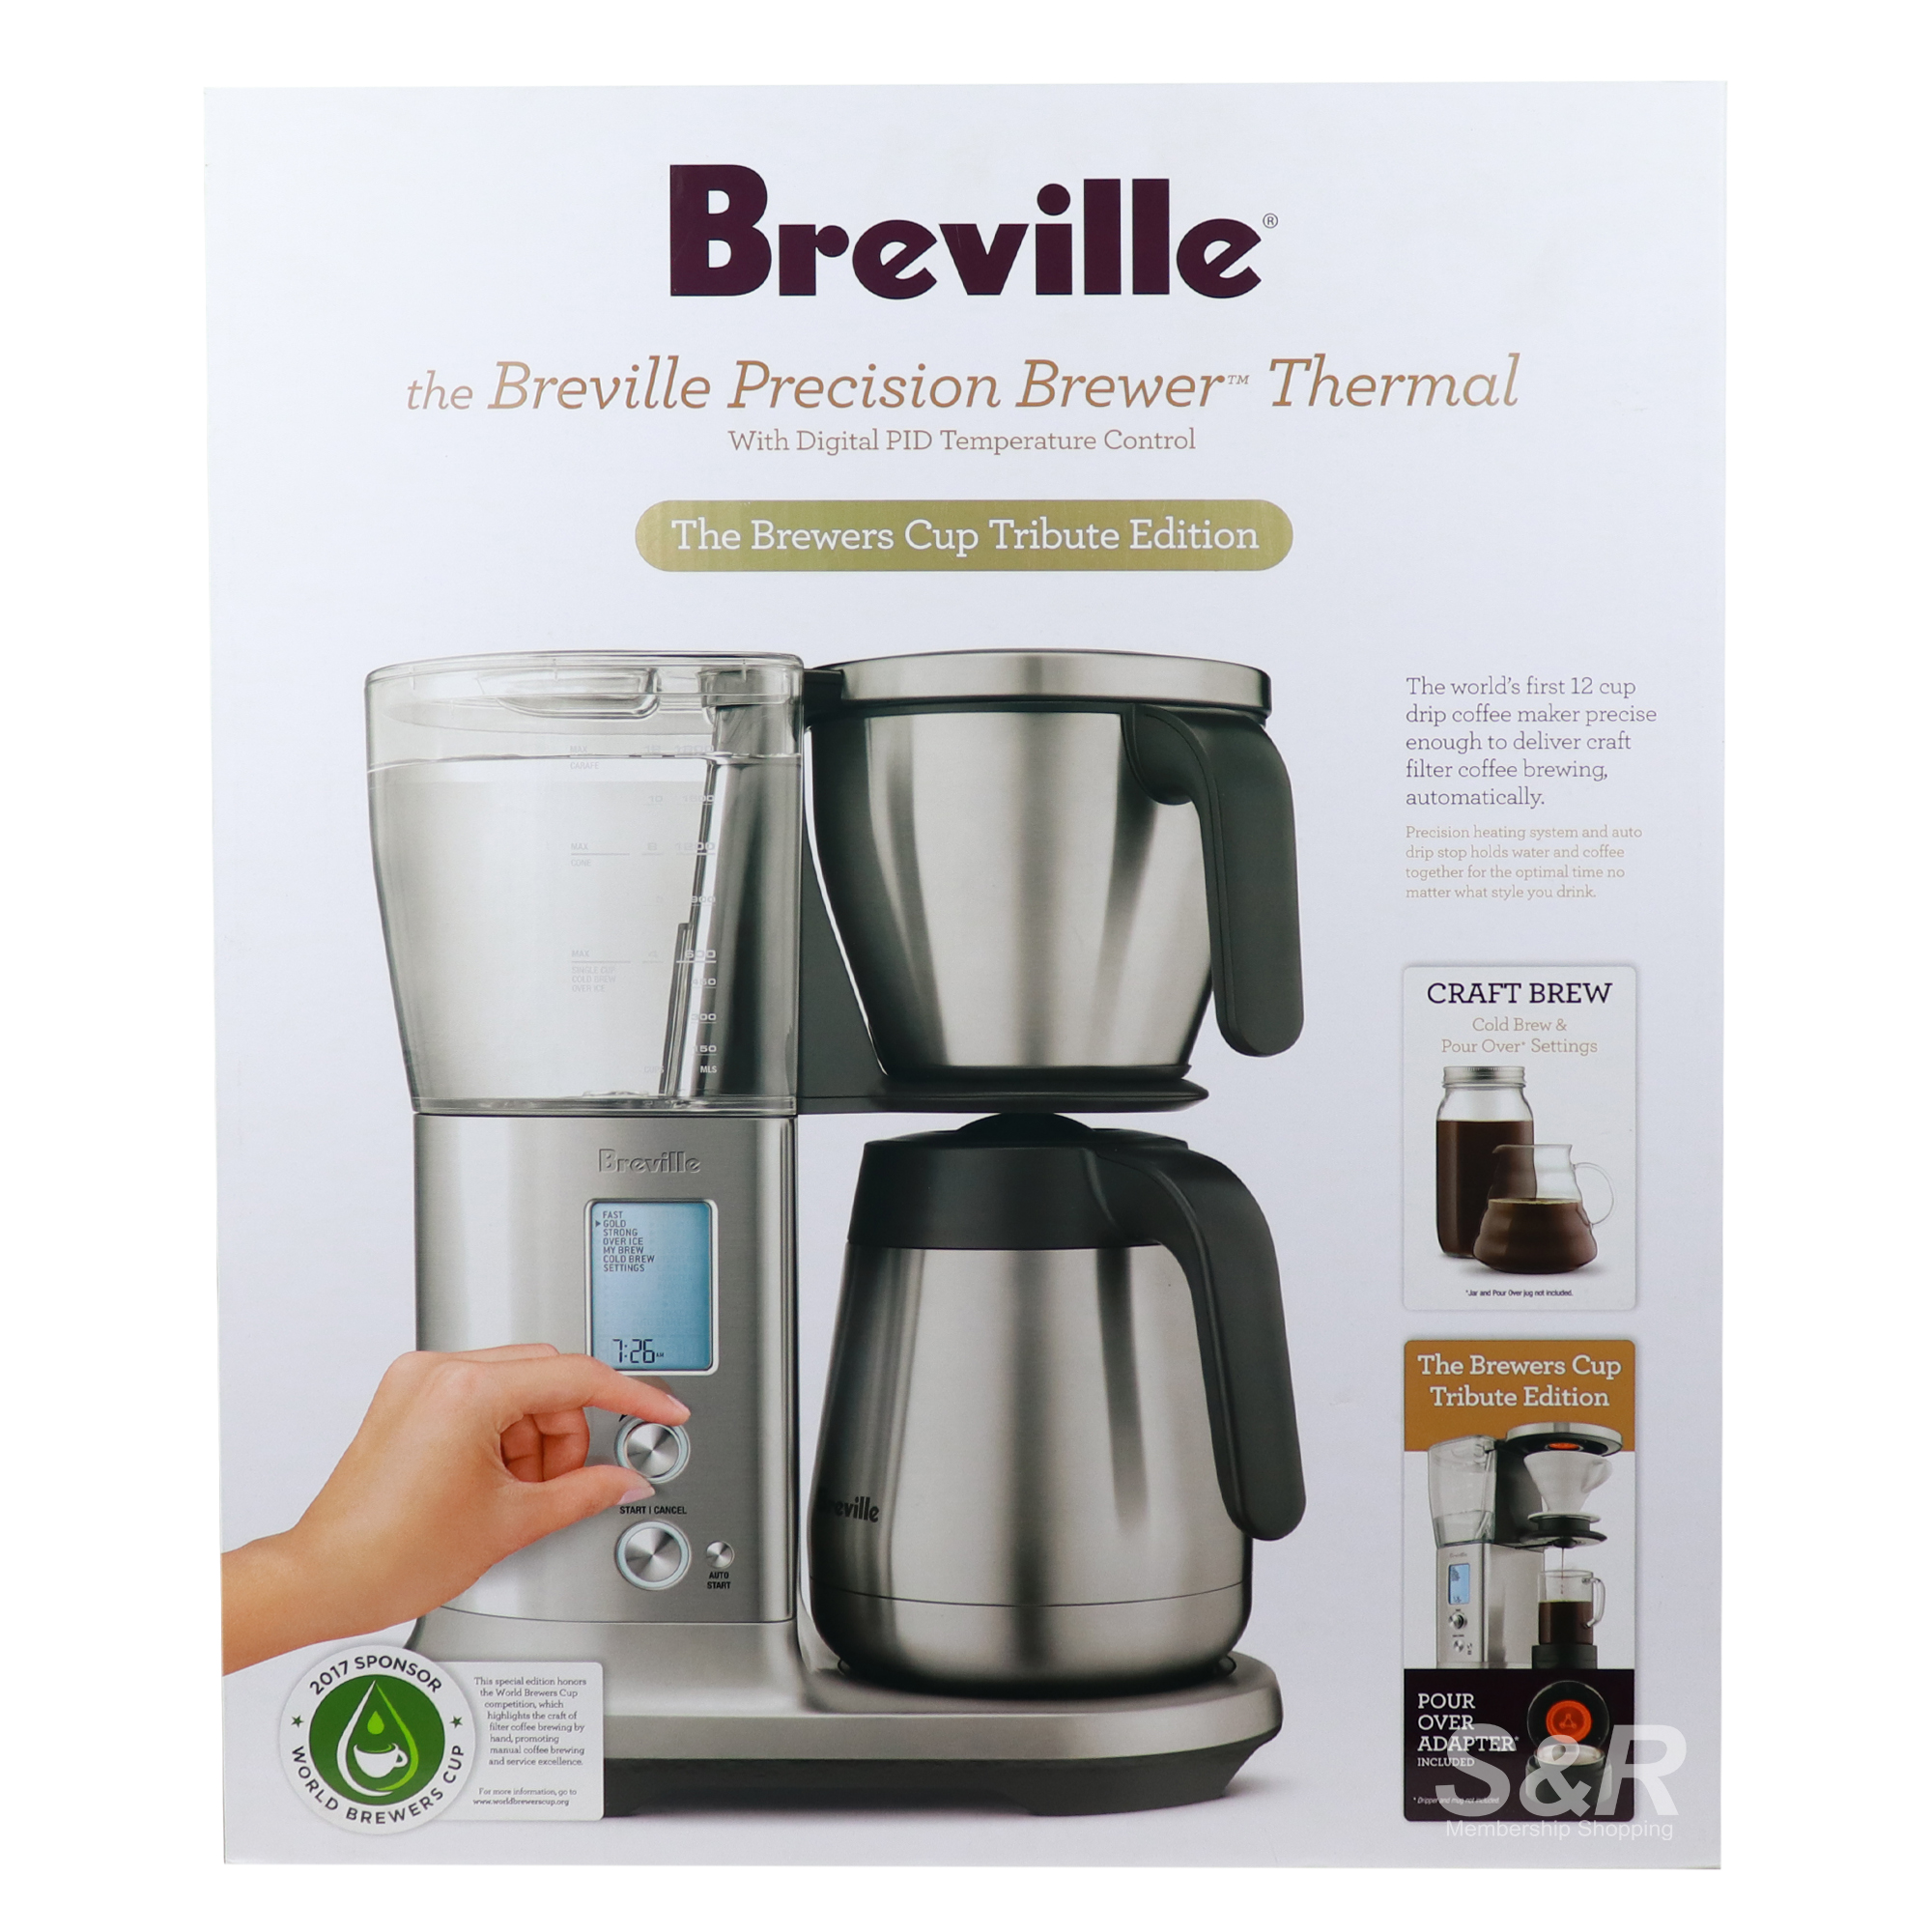 Breville the Breville Precision Brewer Thermal BDC455BSS